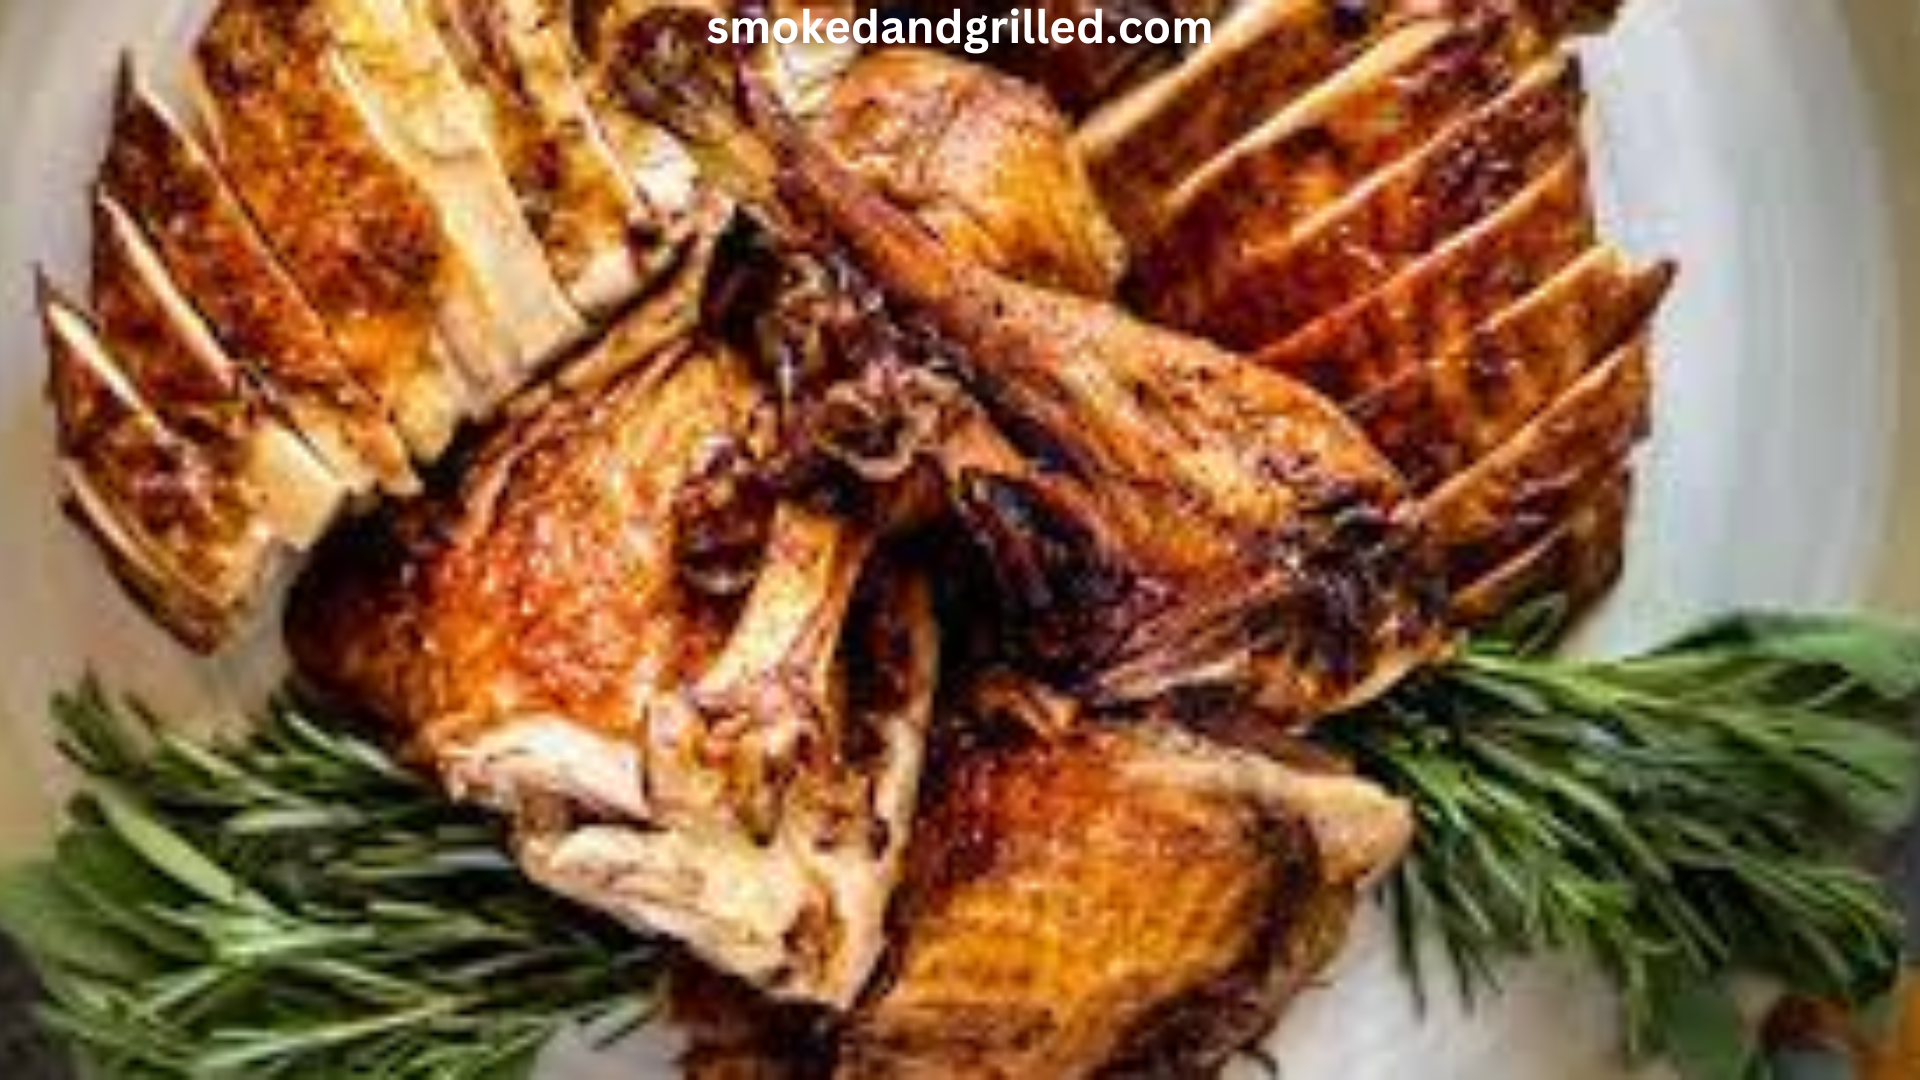 What Are The Benefits Of Deep Frying A Brined Turkey Compared To Other Cooking Methods?